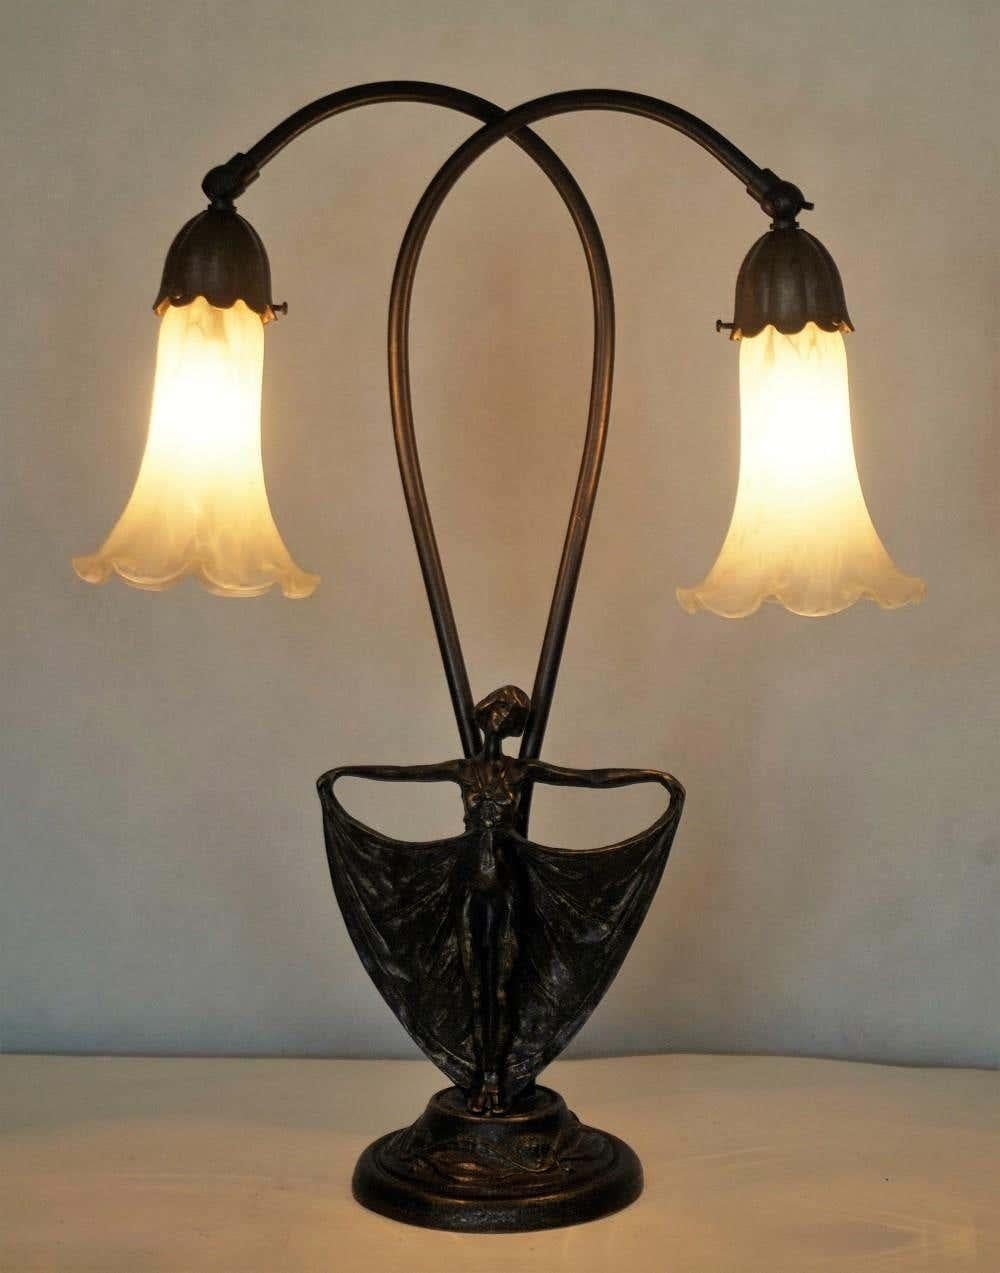 French Art Deco Bronze Figurine Articulated Double Arm Table Lamp, 1930-1939 For Sale 2